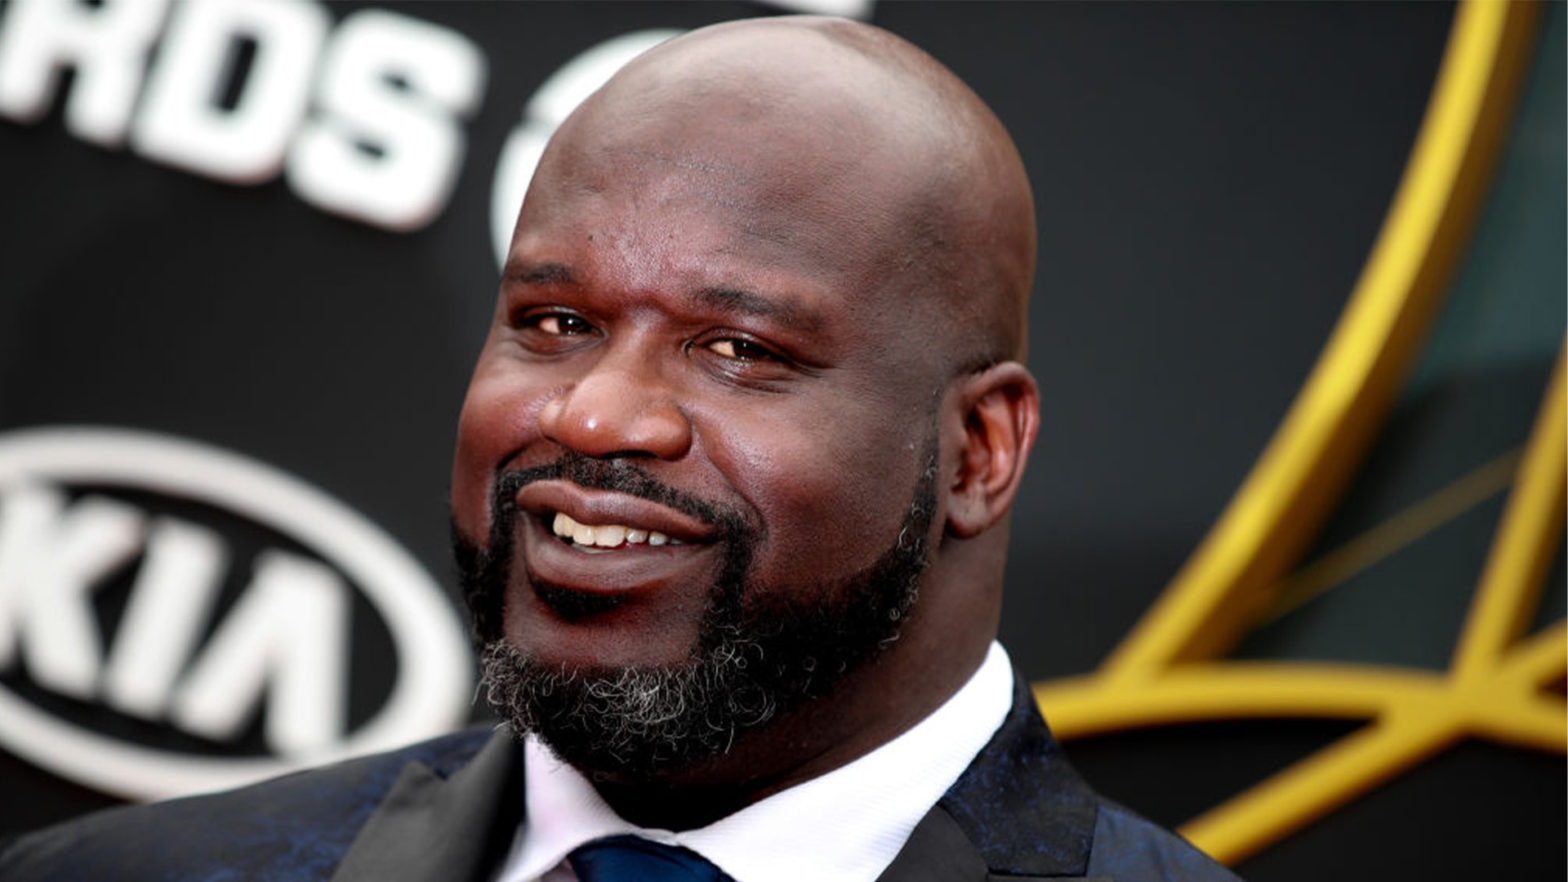 Shaquille O'Neal Wanted To Buy The Phoenix Suns Until He Saw This Tech Billionaire's Name